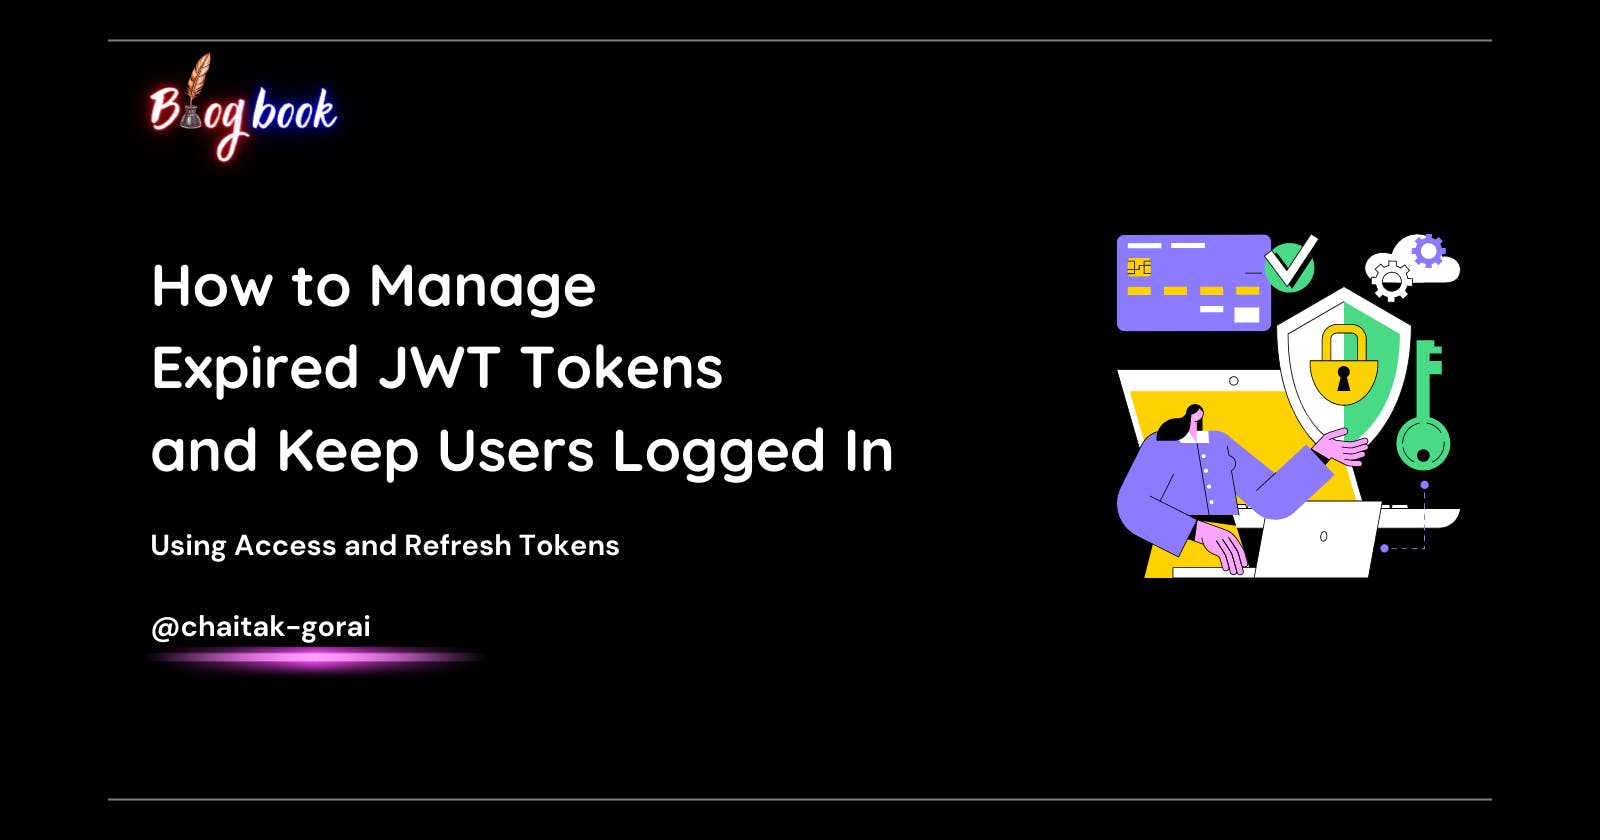 How to Manage Expired JWT Tokens and Keep Users Logged In